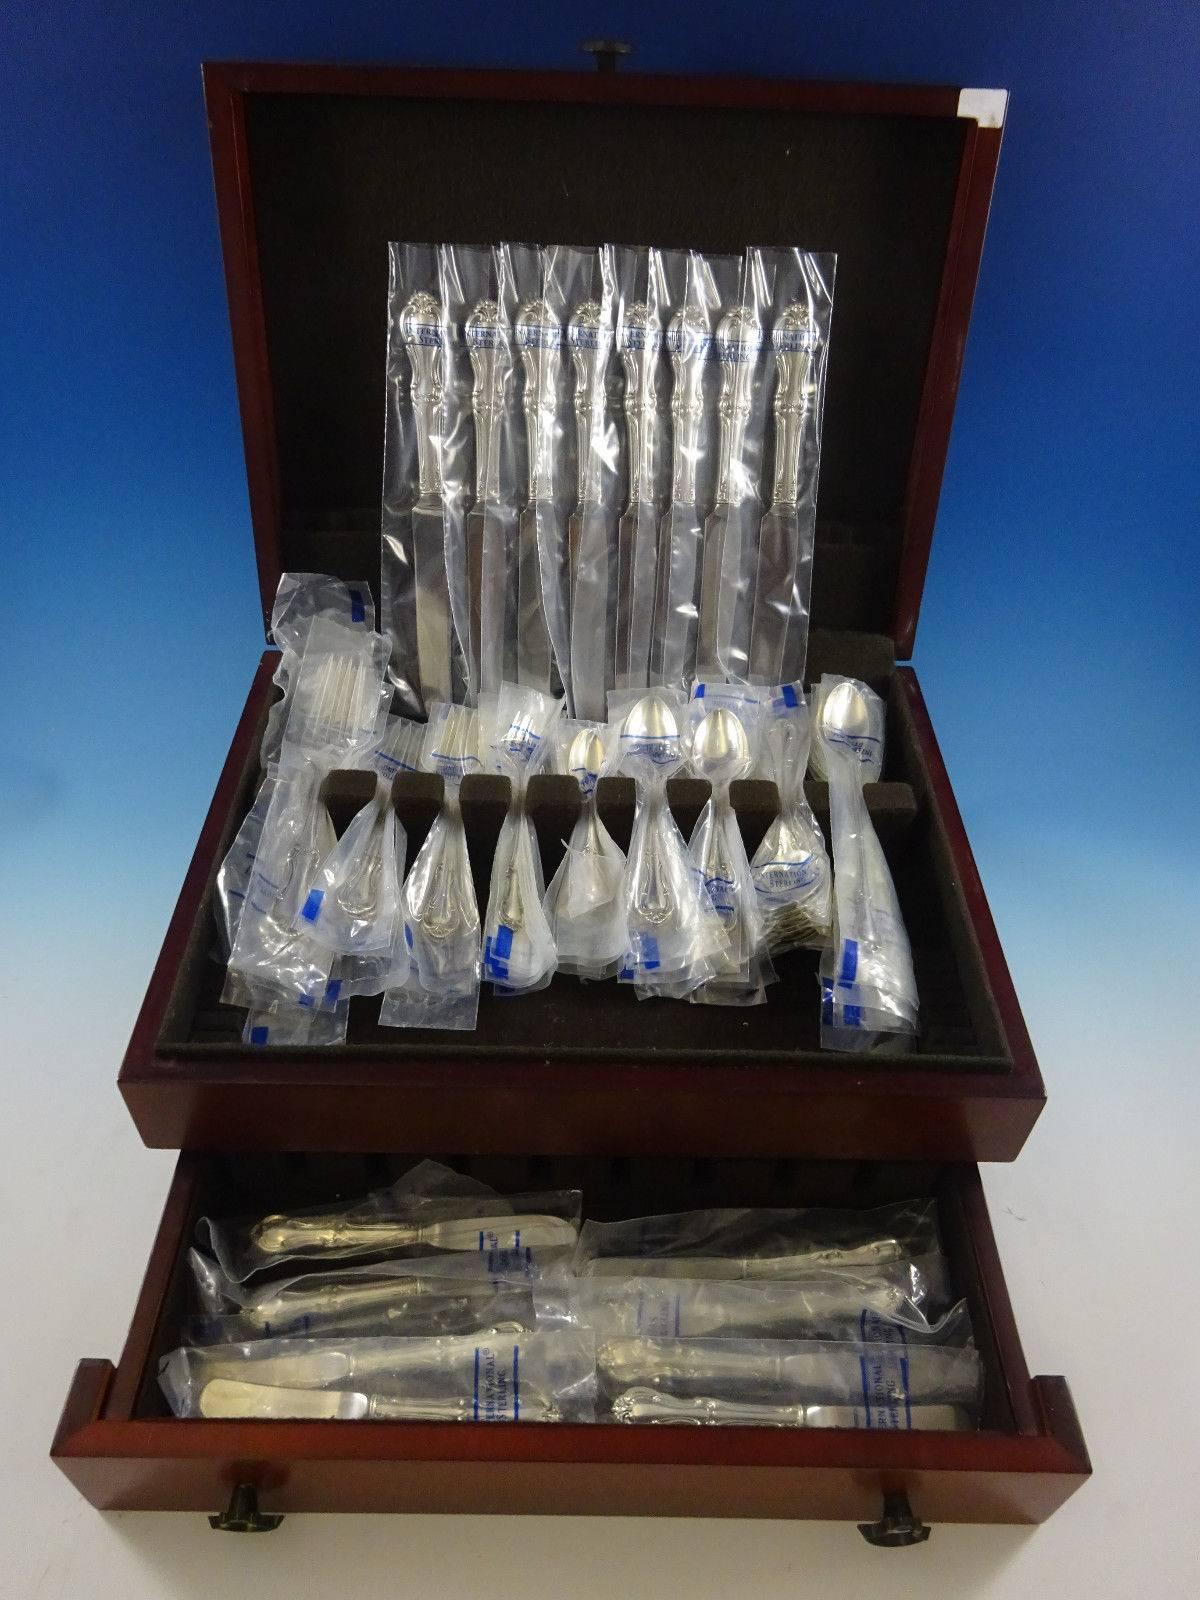 New Joan of Arc by International sterling silver Dinner Size Flatware set of 73 pieces. 

This set includes:

Eight dinner knives, 9 5/8